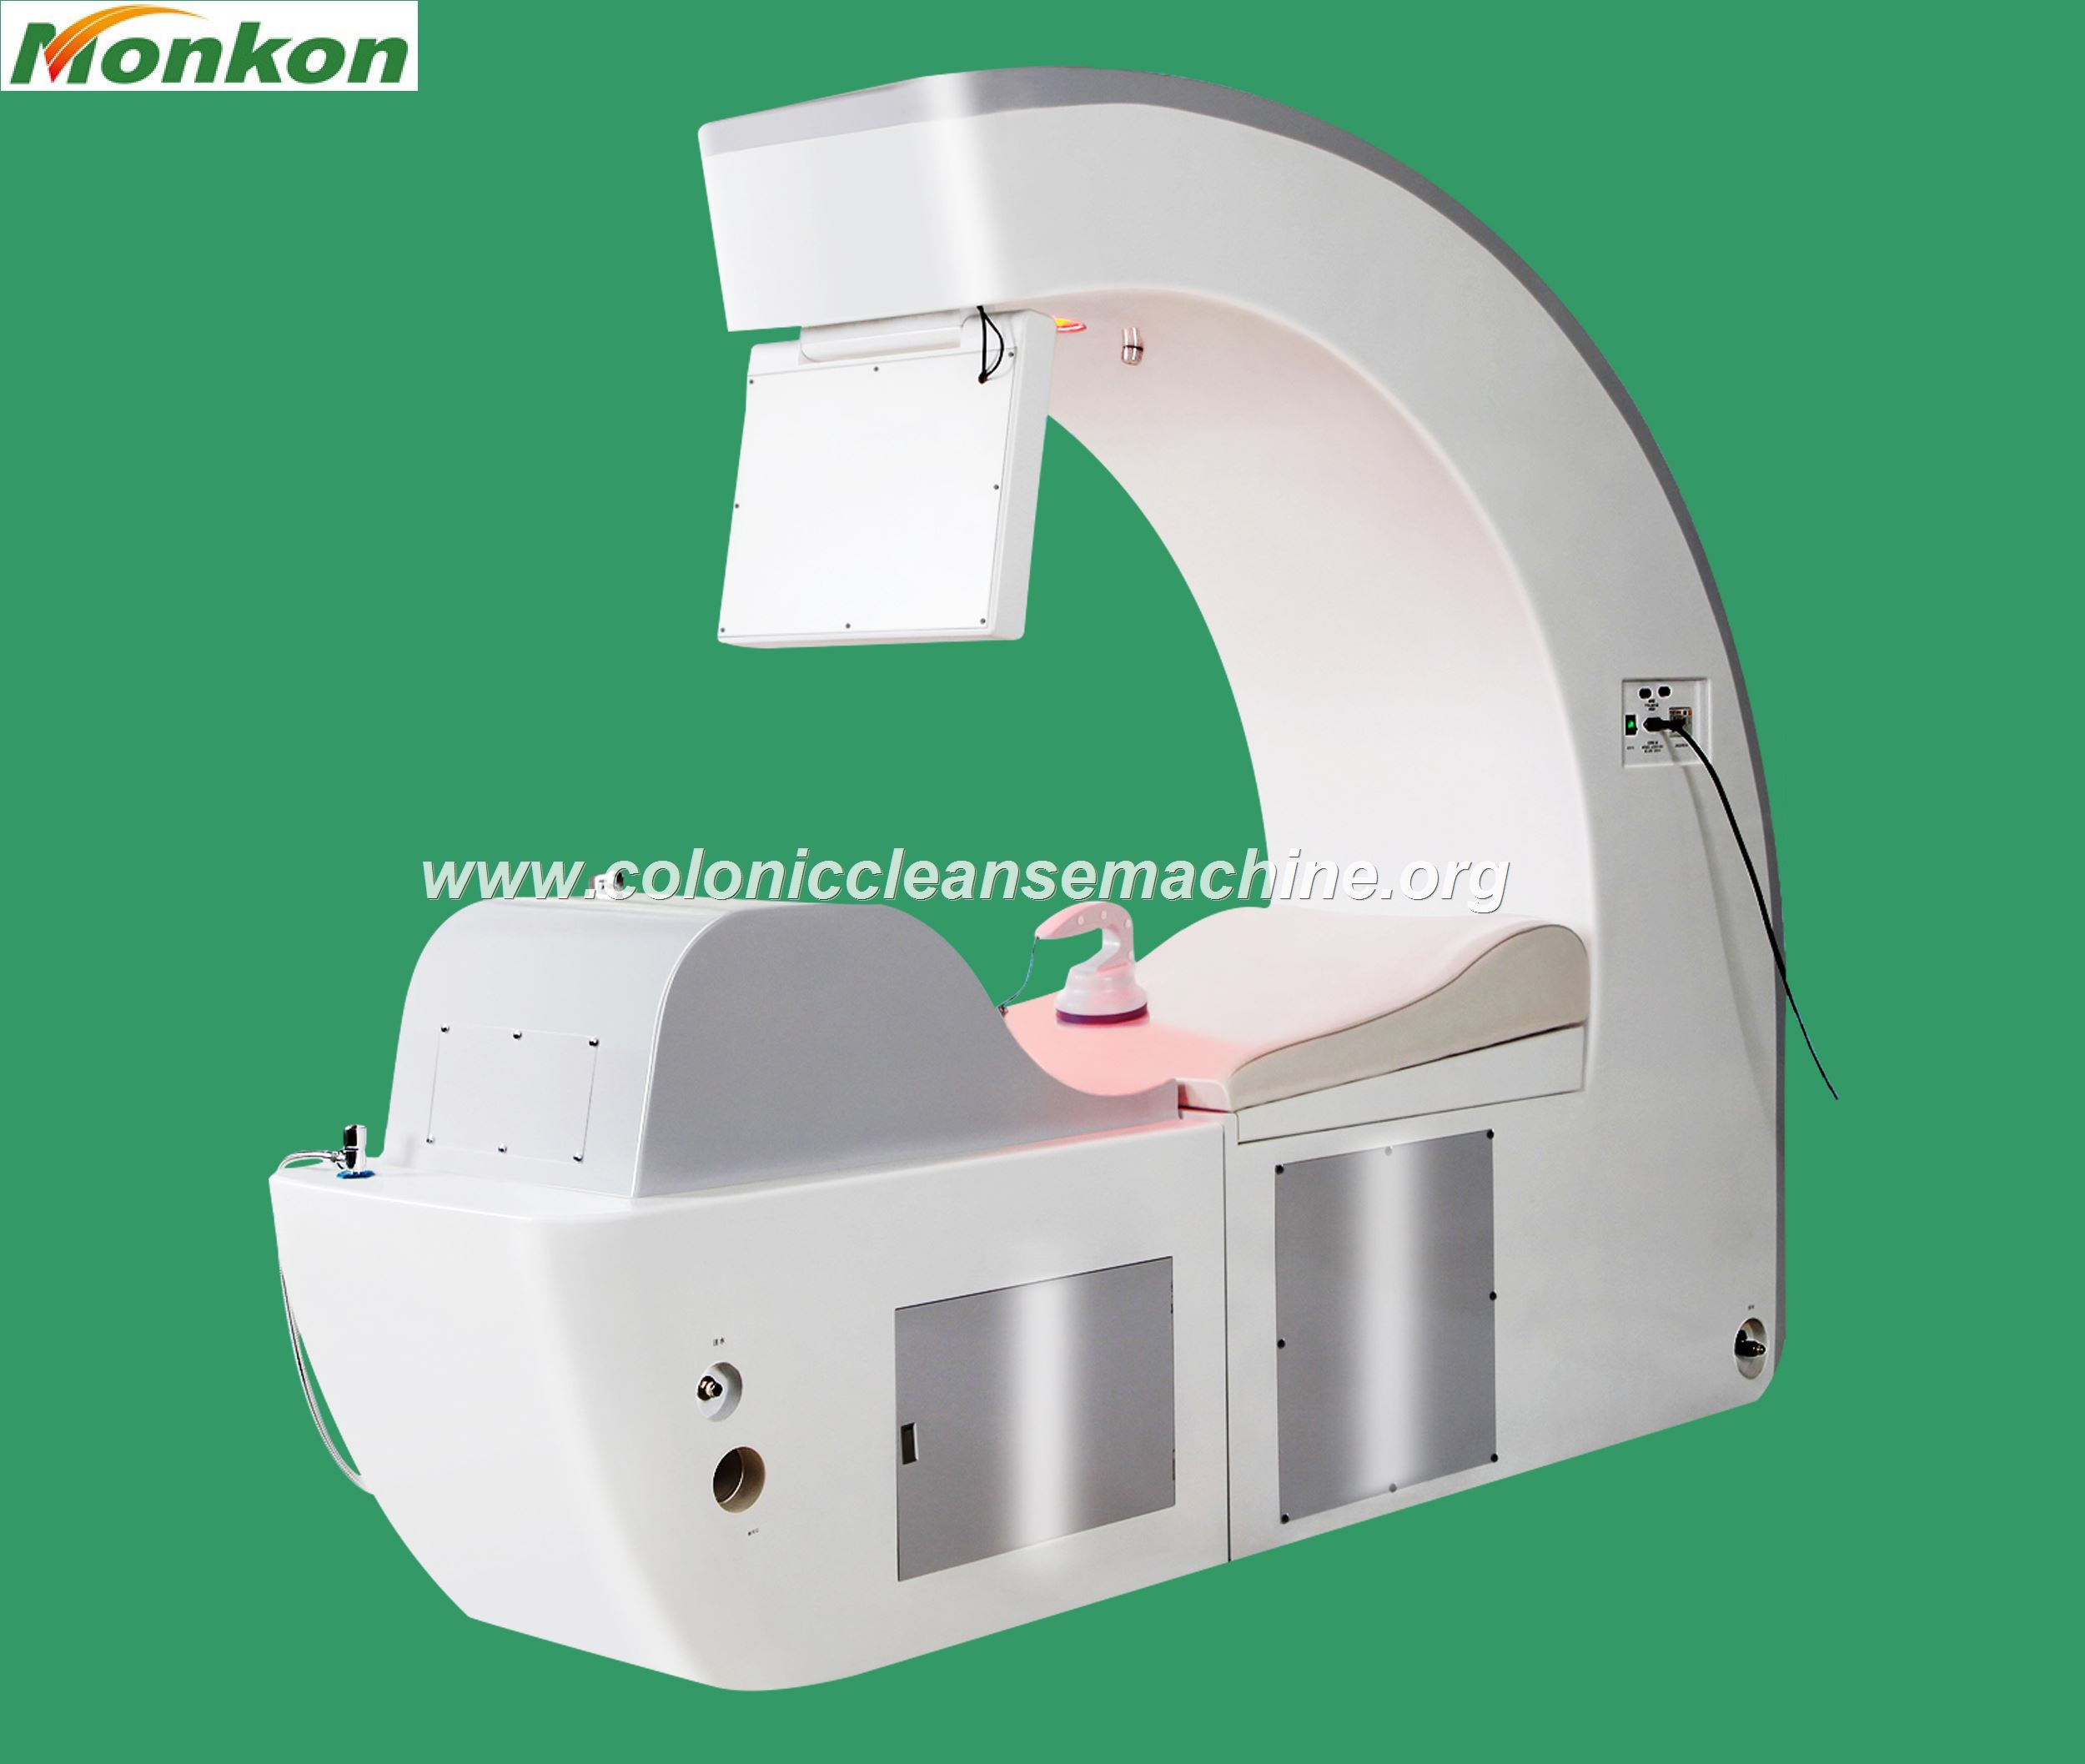 MAIKONG Colon hydrotherapy equipment manufacturers